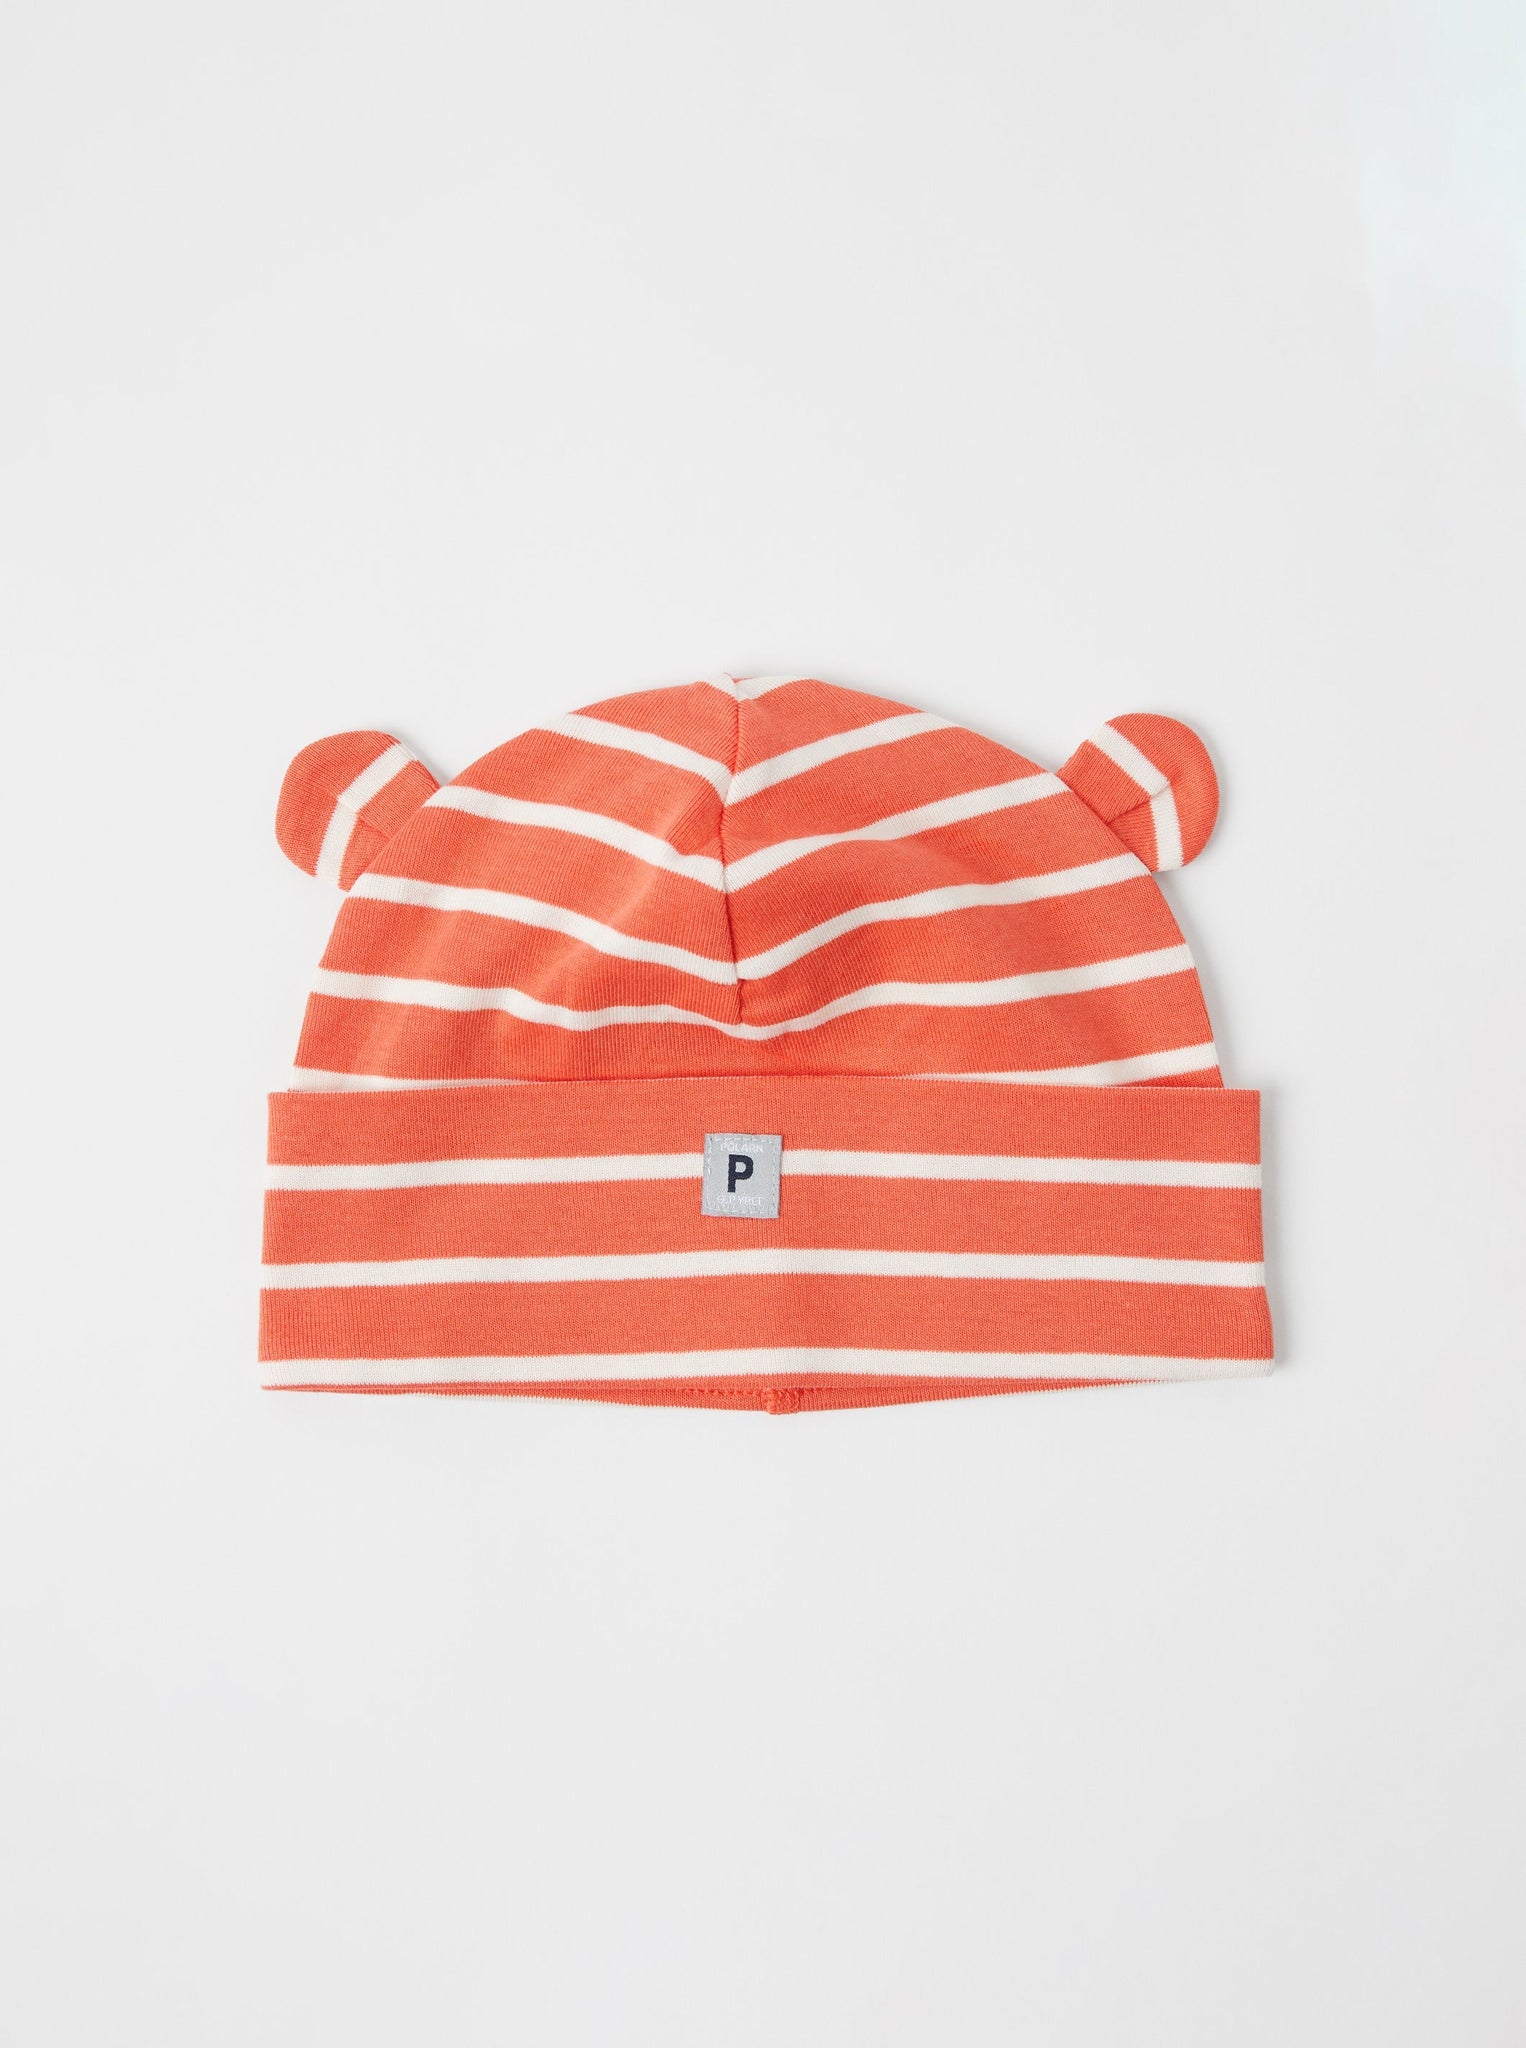 Organic Cotton Orange Baby Beanie Hat from the Polarn O. Pyret babywear collection. The best ethical baby clothes